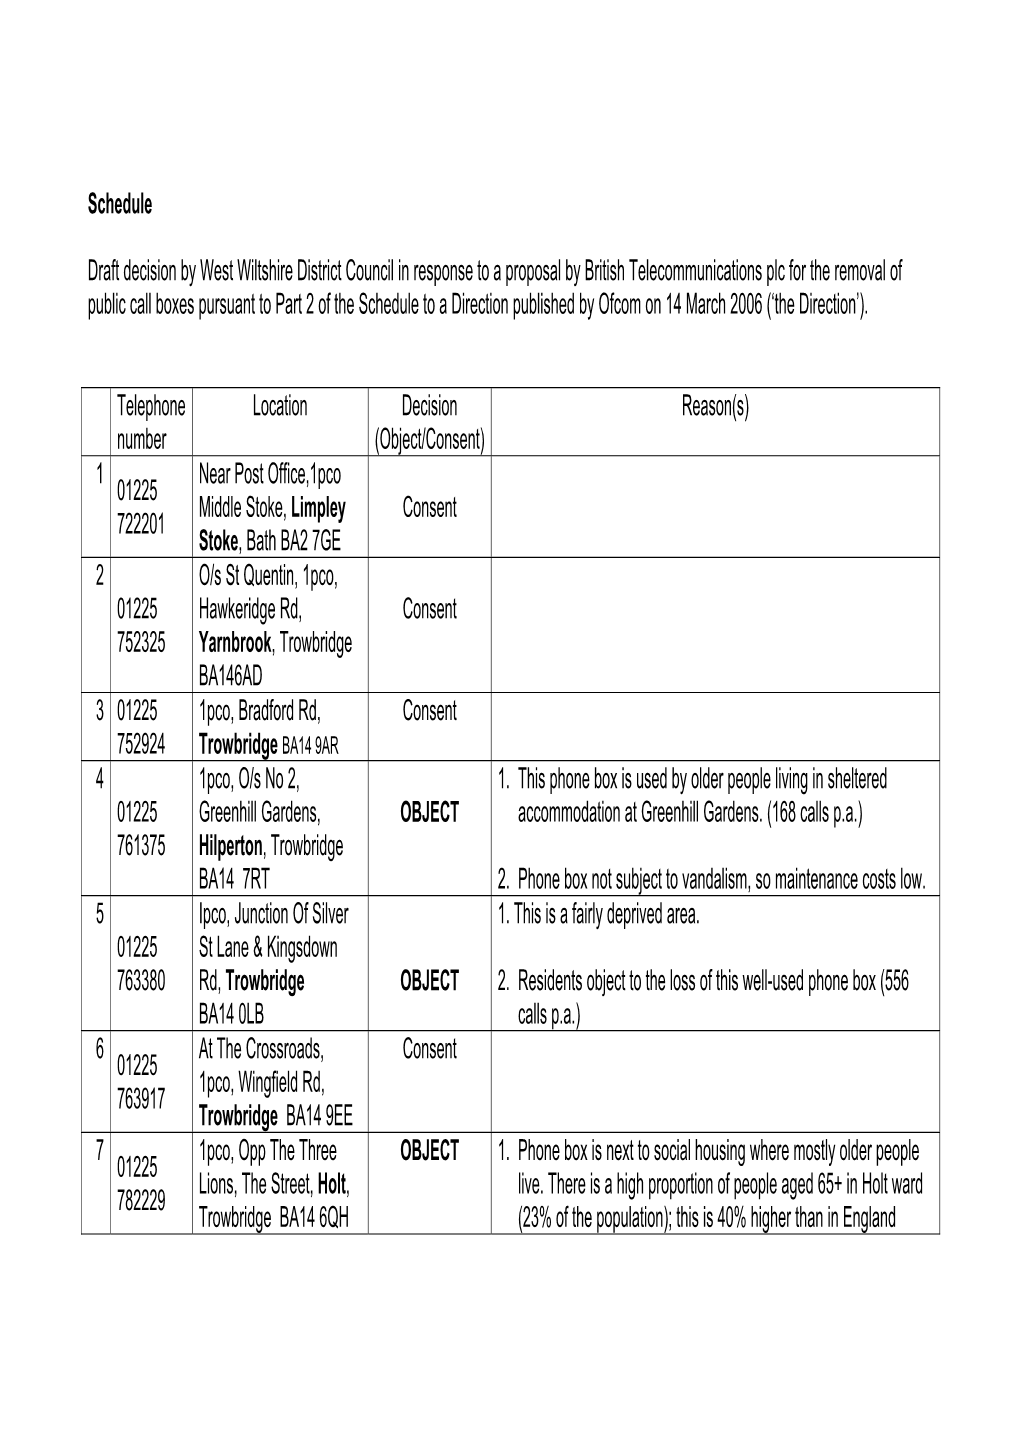 Schedule Draft Decision by West Wiltshire District Council In